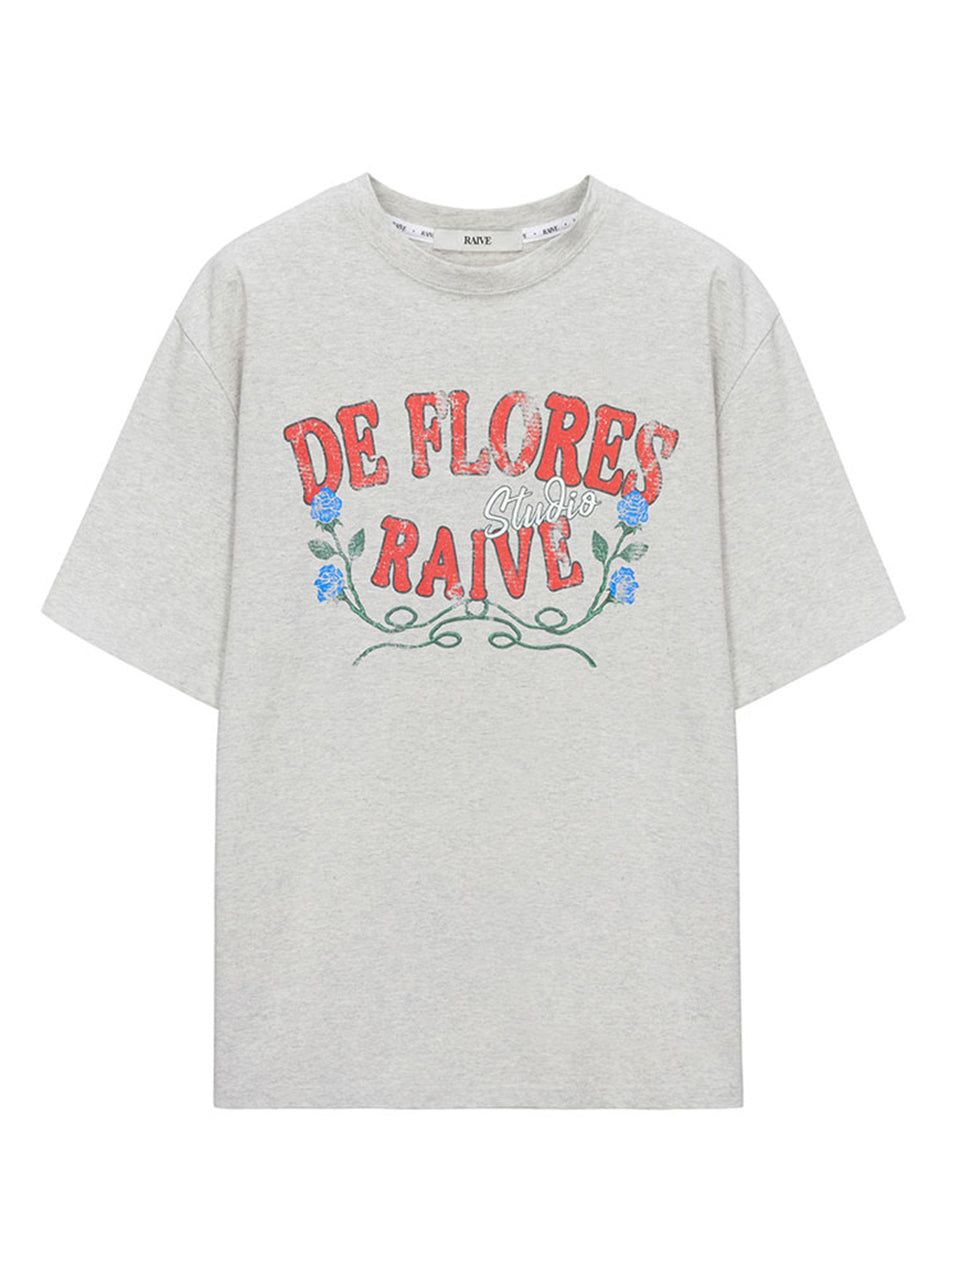 Back Yard Rose Graphic T-shirt in L/Grey